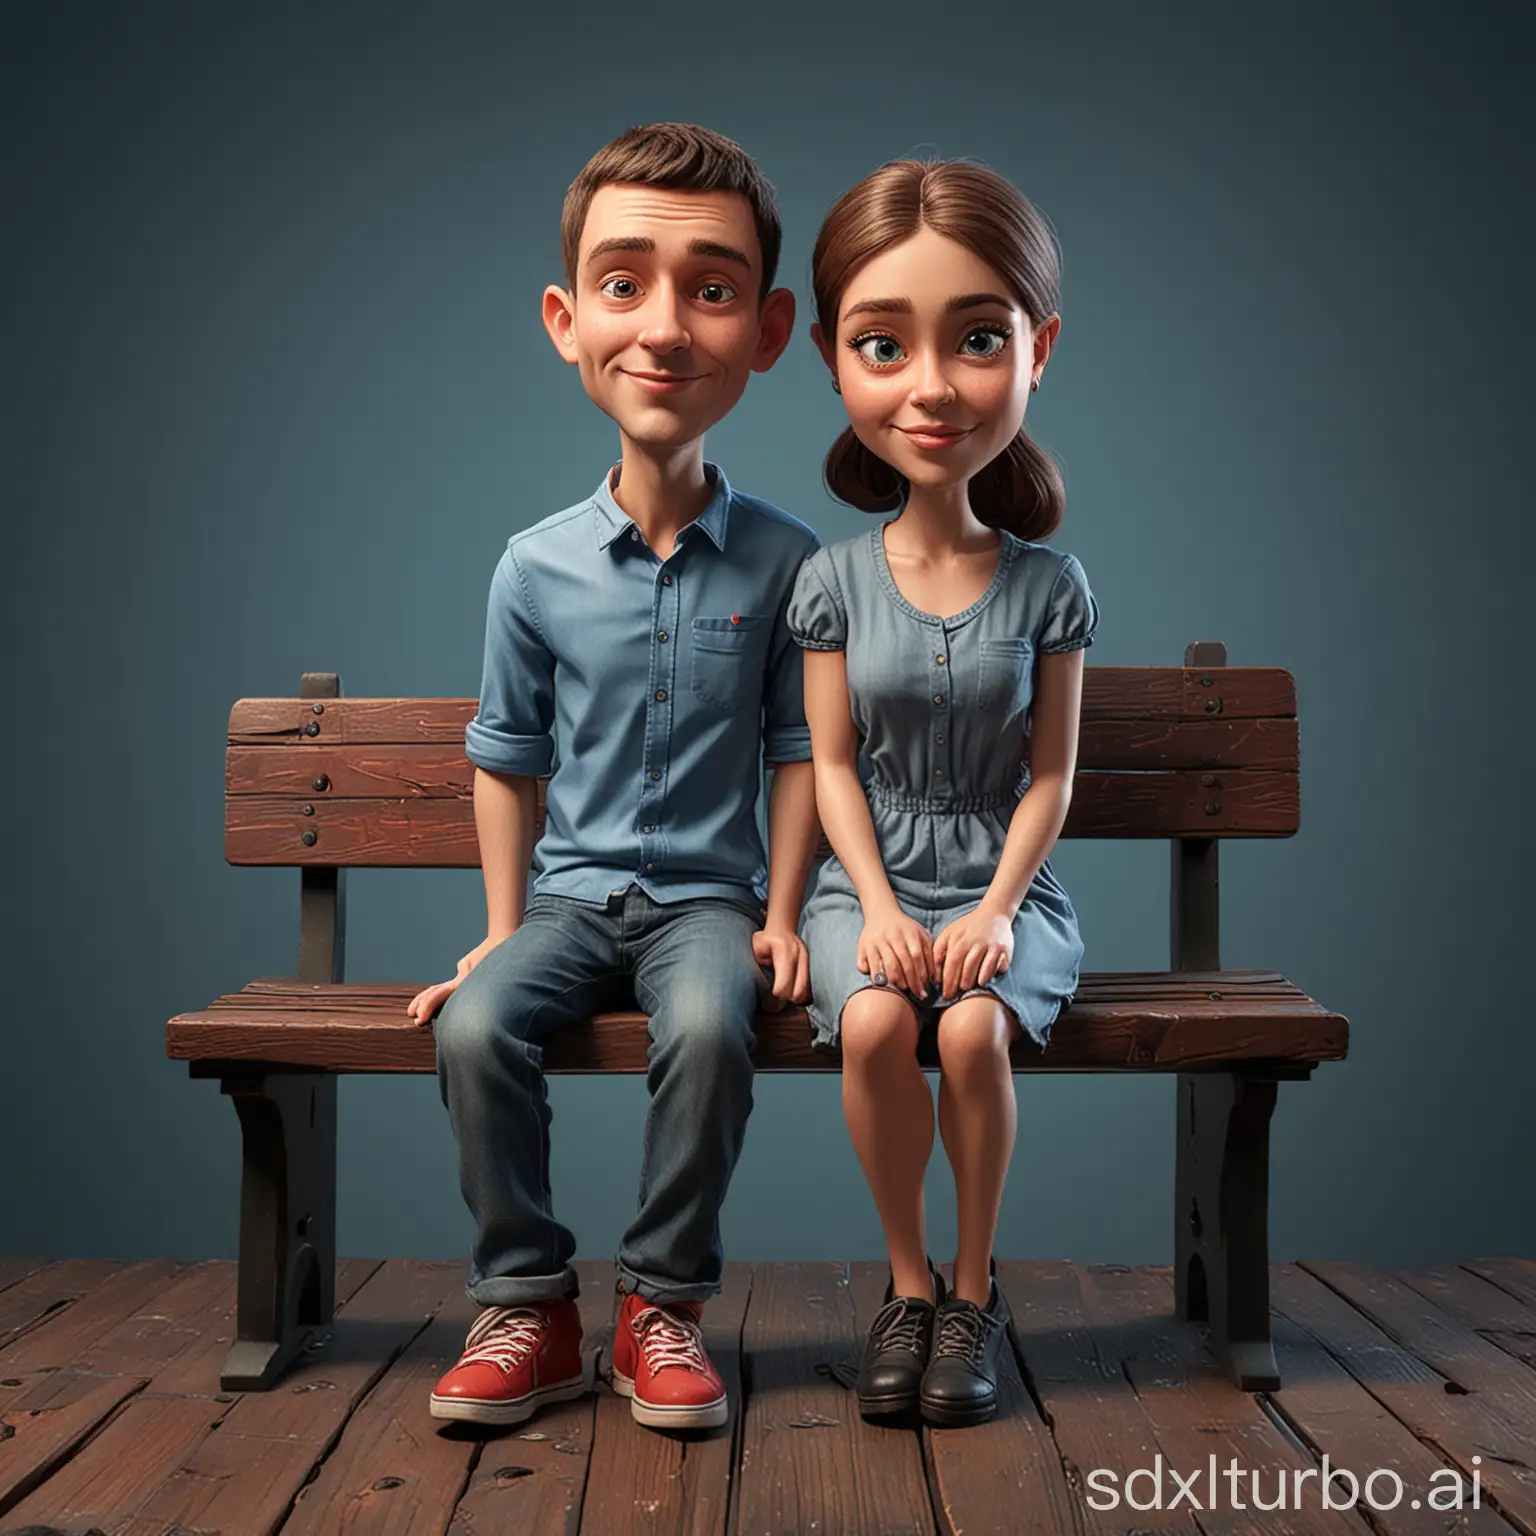 Create a realistic 3D cartoon style full body caricature with a big head. A young couple is sitting on an old black wooden bench. The background is reddish blue. use soft photographic lighting.